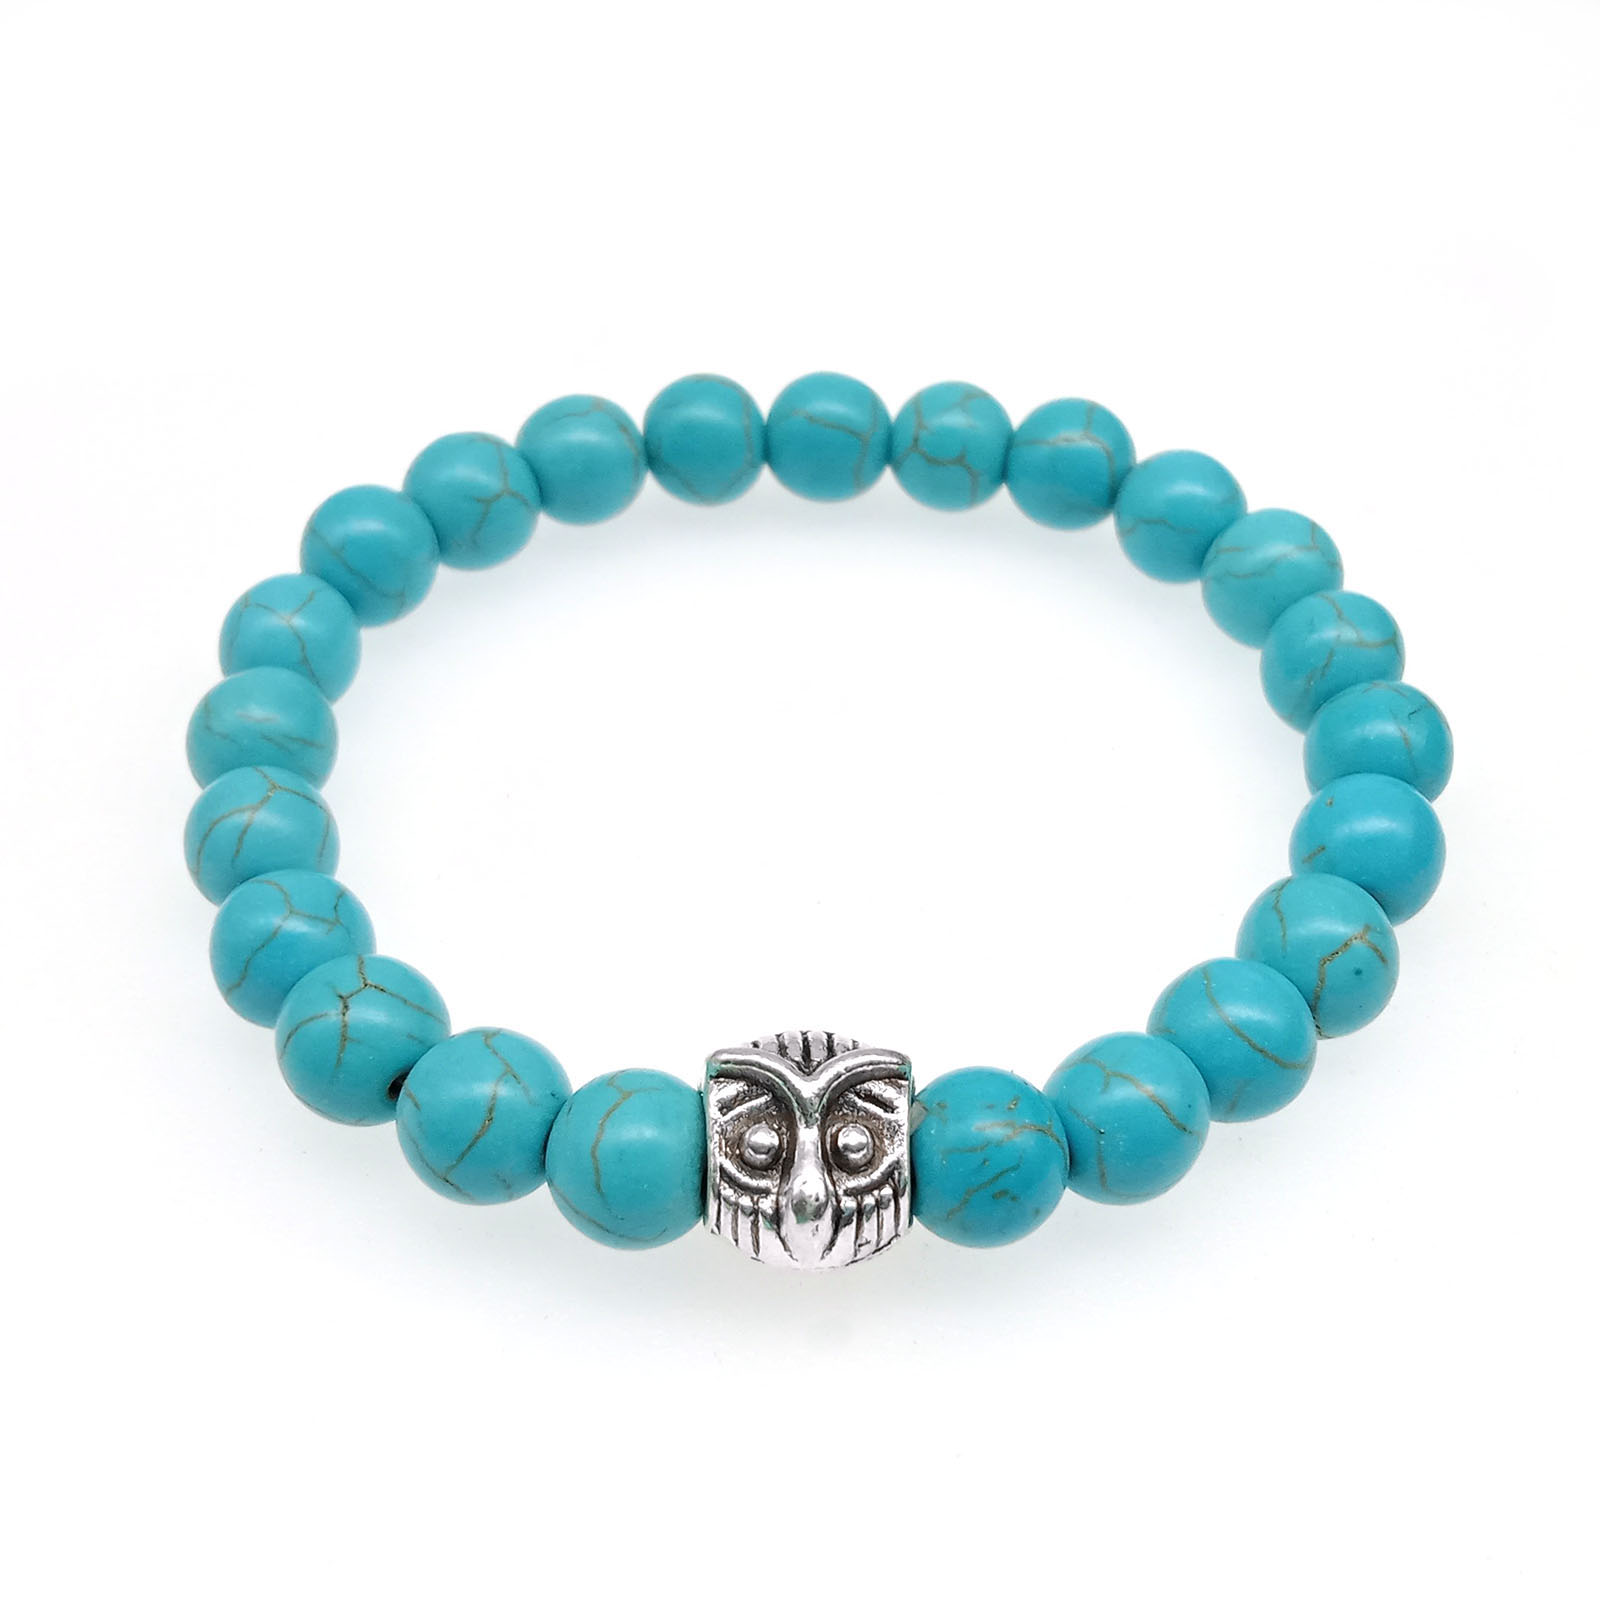 1:Made of 23 8mm turquoise beads and an alloy accessory